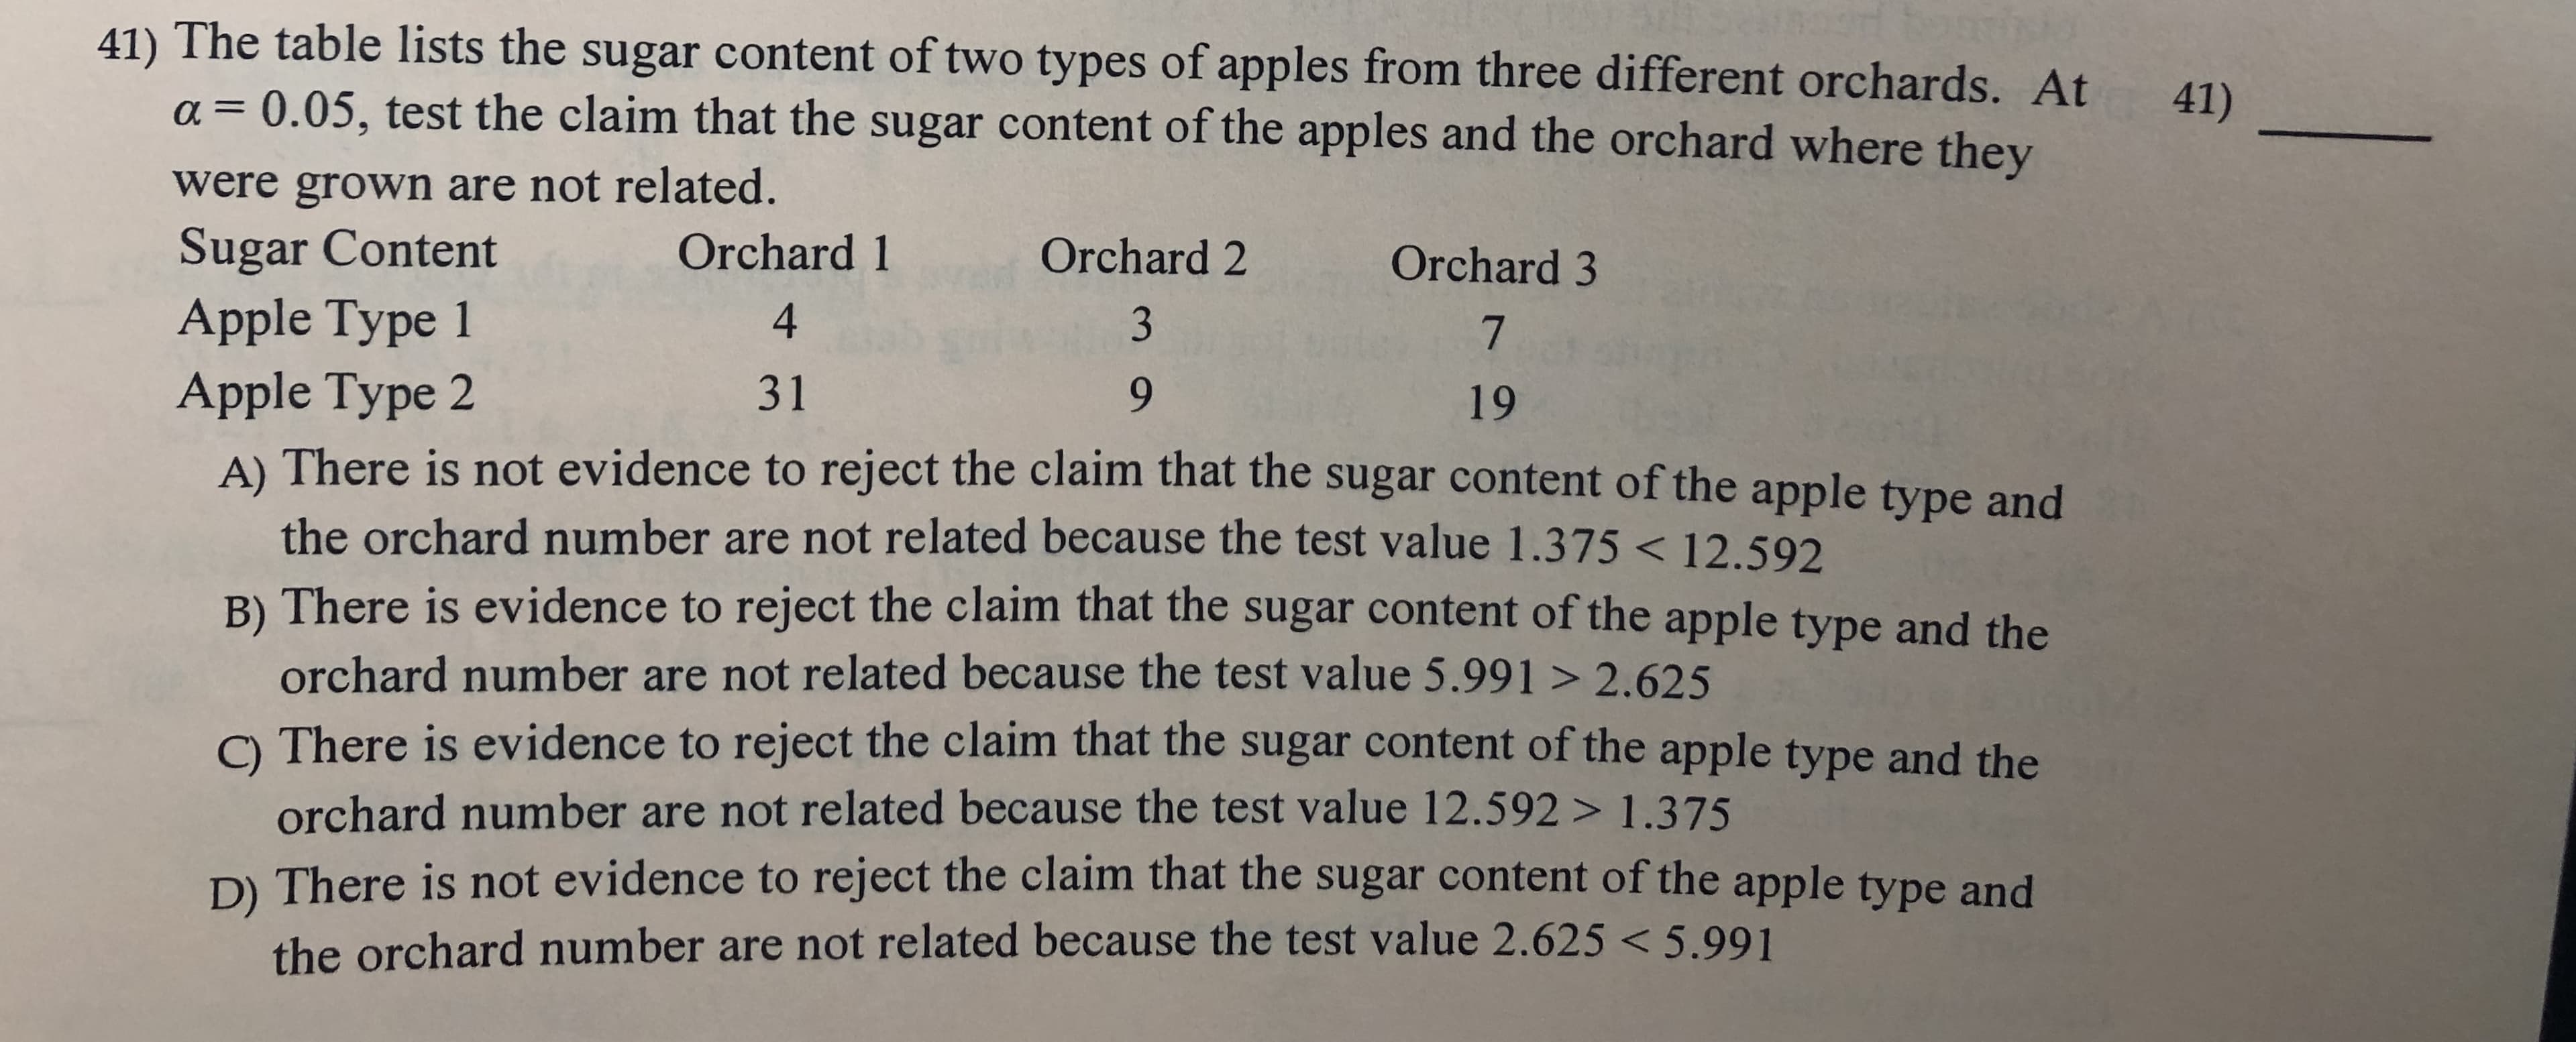 41) The table lists the sugar content of two types of apples from three different orchards. At
a 0.05, test the claim that the sugar content of the apples and the orchard where they
41)
1
were grown are not related.
Sugar Content
Apple Type 1
Orchard 1
Orchard 2
Orchard 3
4
3
7
31
Apple Type 2
A) There is not evidence to reject the claim that the sugar content of the apple type and
19
the orchard number are not related because the test value 1.375< 12.592
B) There is evidence to reject the claim that the sugar content of the apple type and the
orchard number are not related because the test value 5.991 > 2.625
C There is evidence to reject the claim that the sugar content of the apple type and the
orchard number are not related because the test value 12.592 > 1.375
D) There is not evidence to reject the claim that the sugar content of the apple type and
the orchard number are not related because the test value 2.625 < 5.99 1
